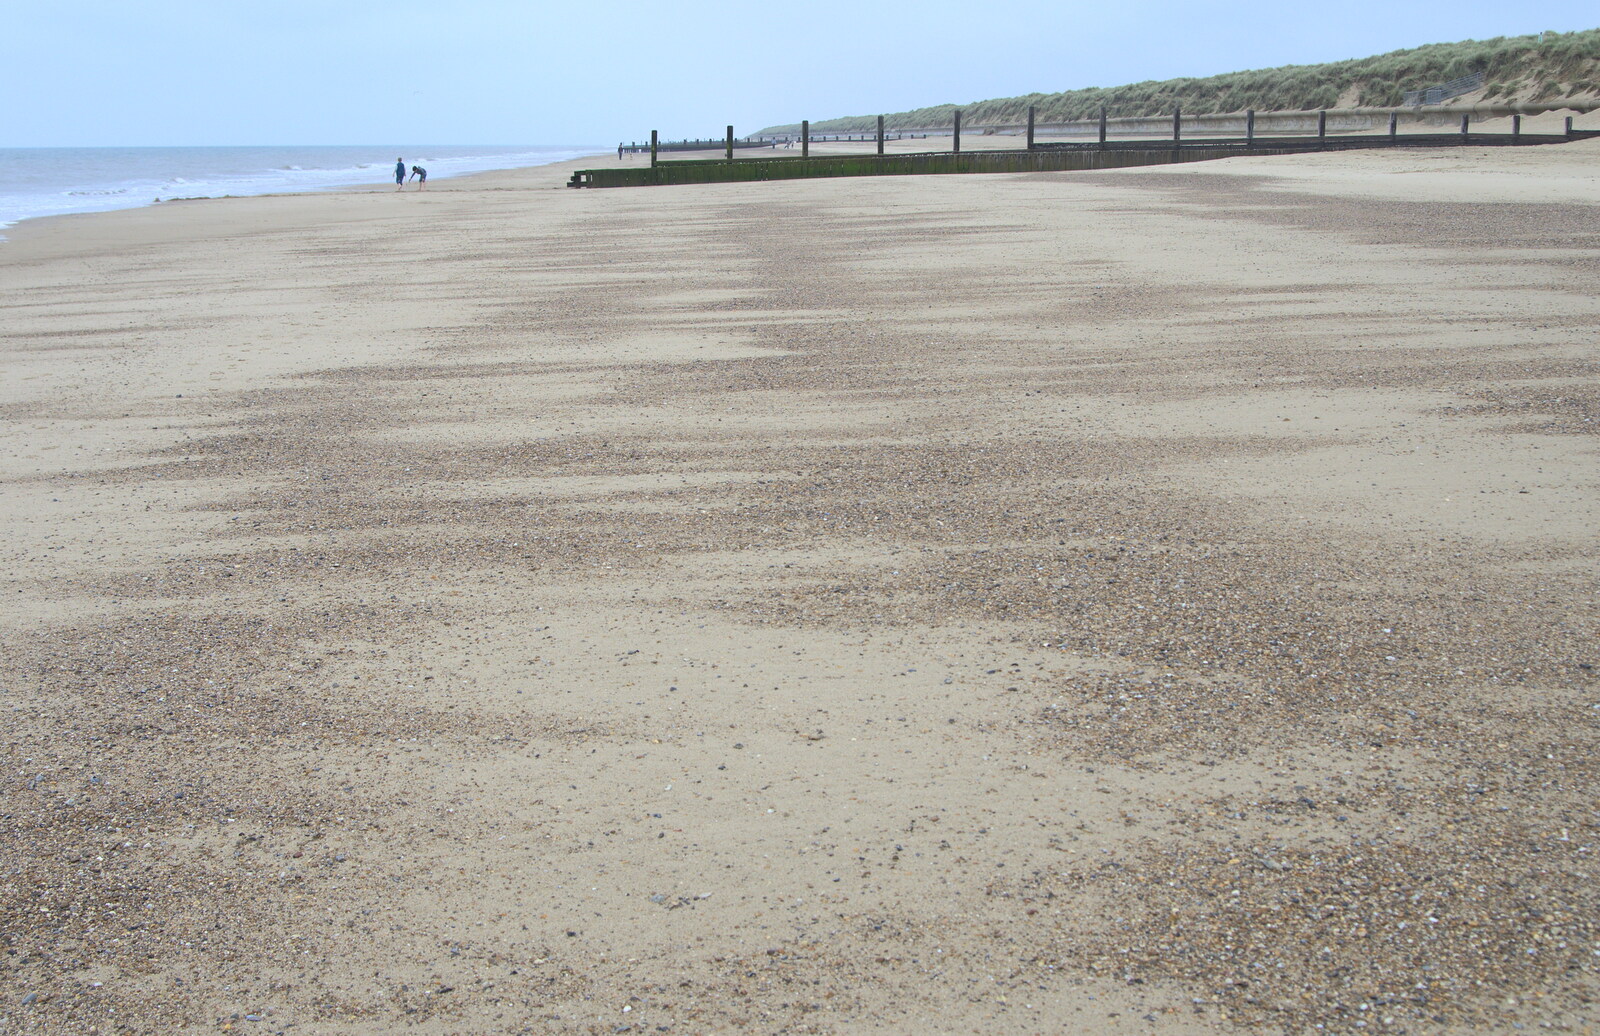 The vast expanse of sand is almost deserted from A Wet Weekend of Camping, Waxham Sands, Norfolk - 13th June 2015